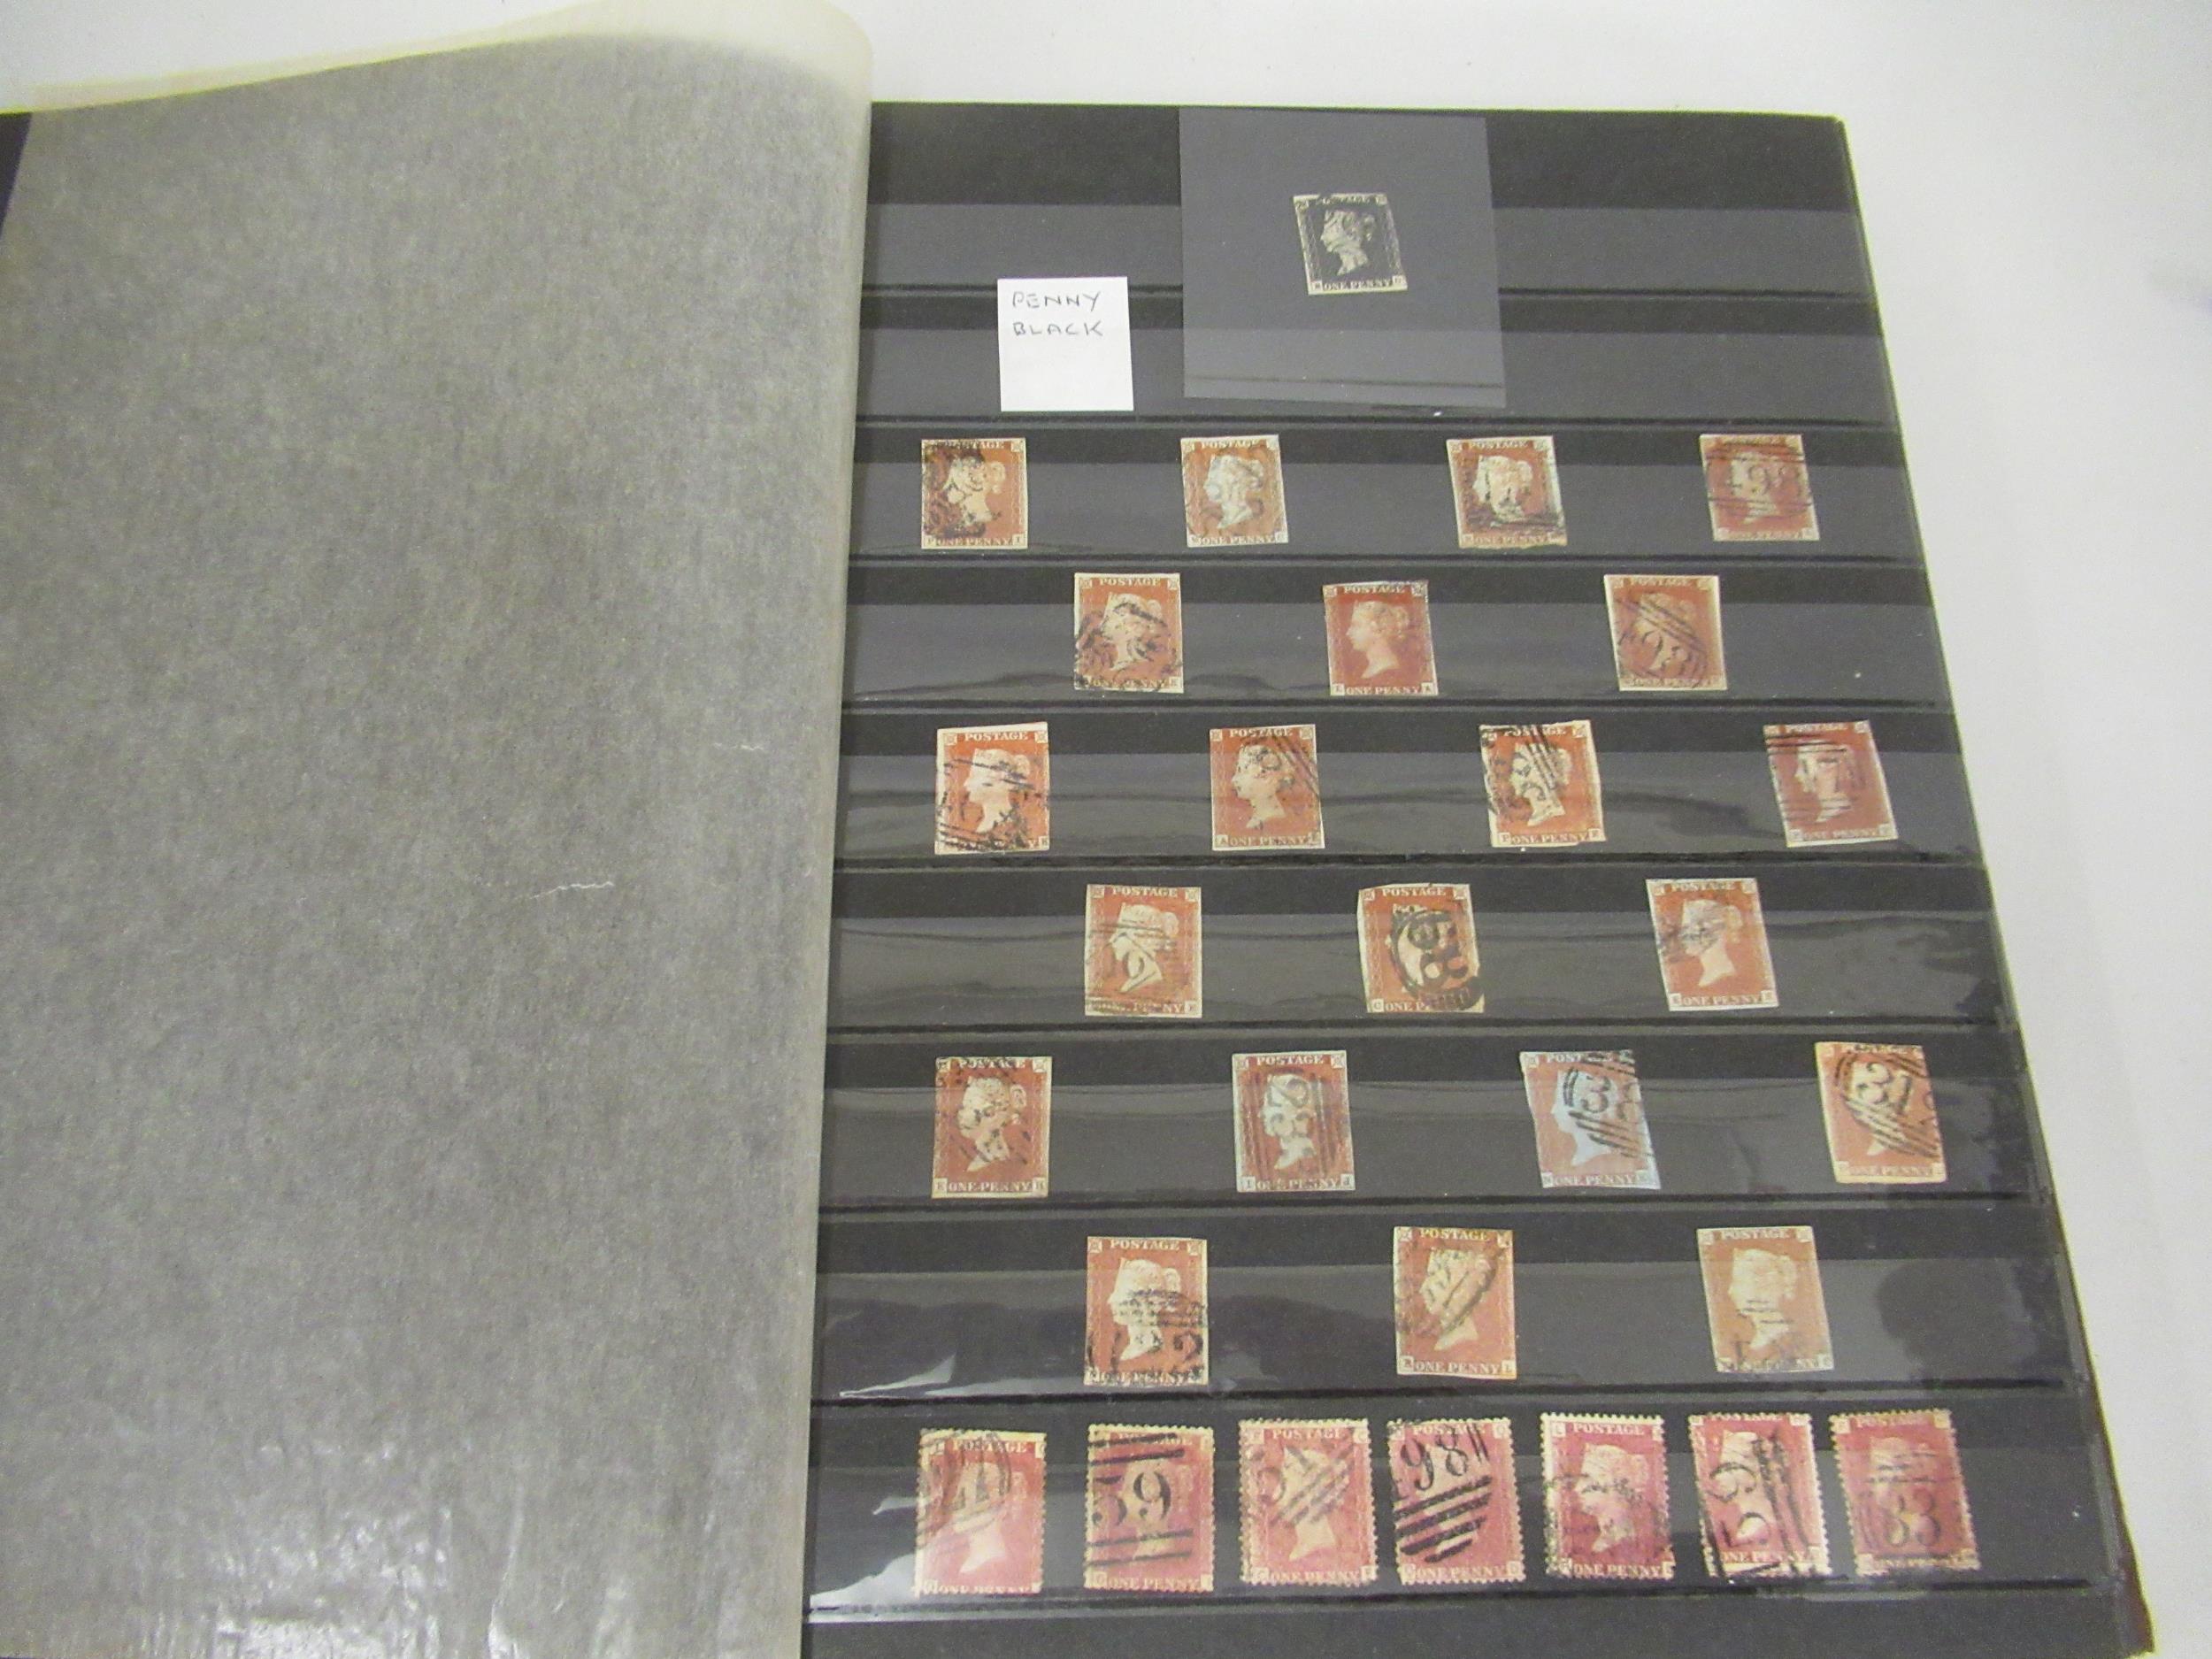 Album containing Penny Black and other British stamps, 1840 - 1980